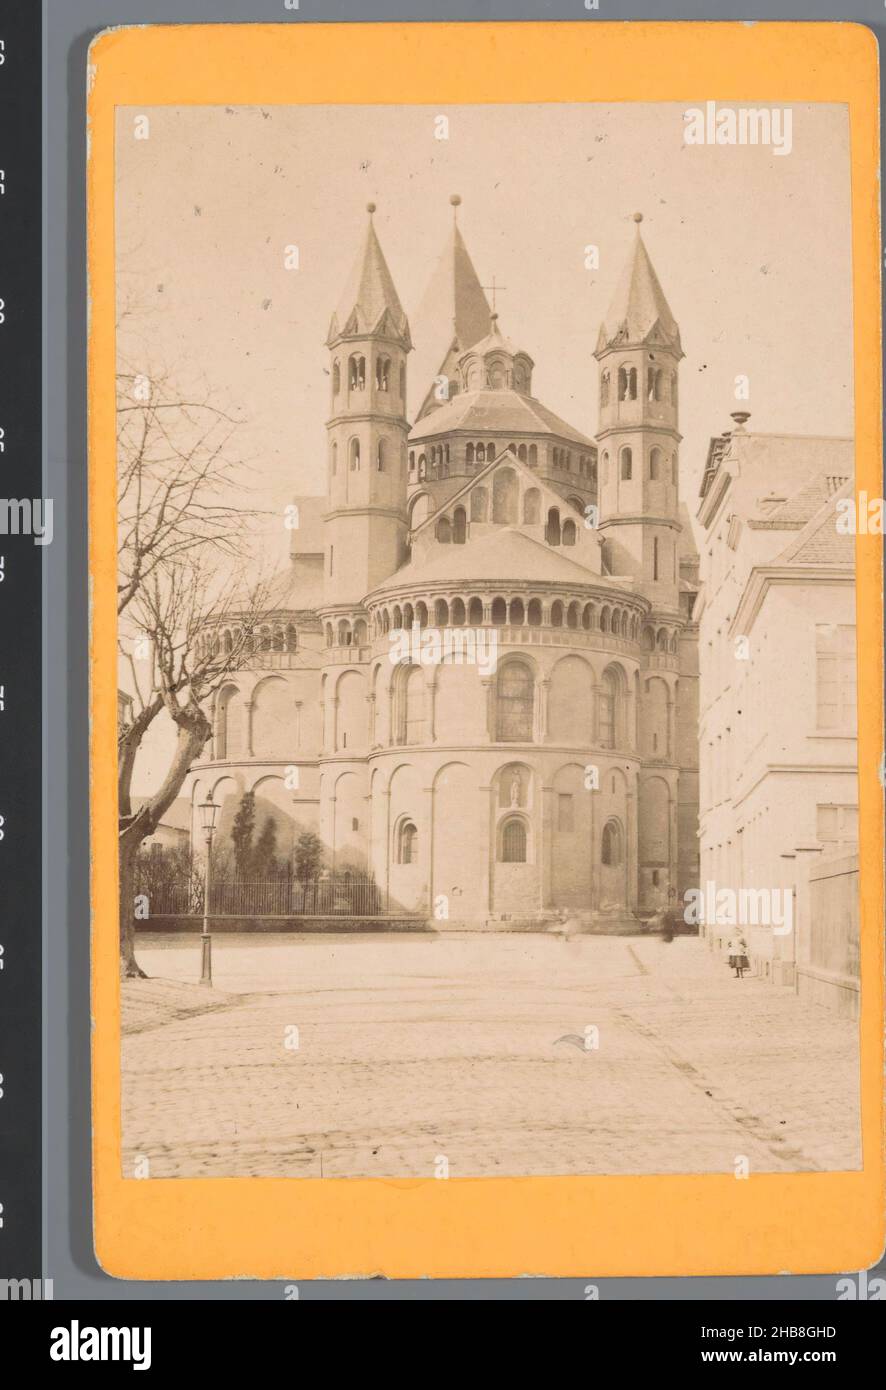 Exterior of the Church of the Apostles in Cologne, St. Aposteln (title on object), Cologne (series title on object), Theodor Creifelds (mentioned on object), Cologne, 1855 - 1875, paper, cardboard, albumen print, height 106 mm × width 67 mm Stock Photo